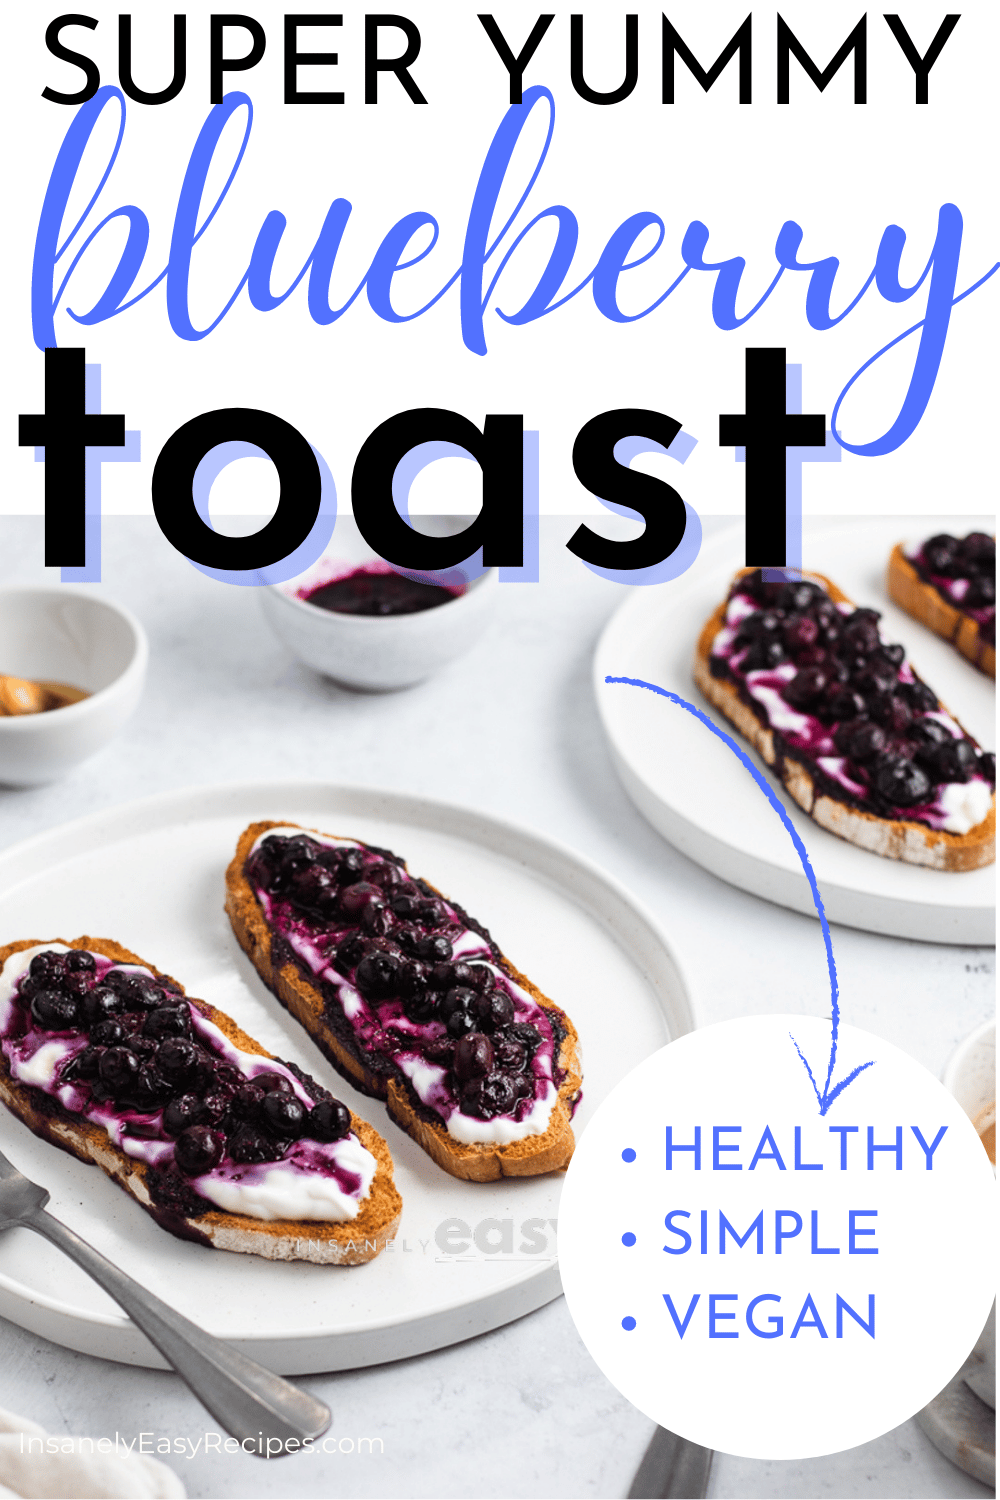 pinterest photo of 2 white plates with 2 servings of blueberry toast on each plate. there is also a fork in the foreground, and a small white bowl of honey and blueberry jam in the background